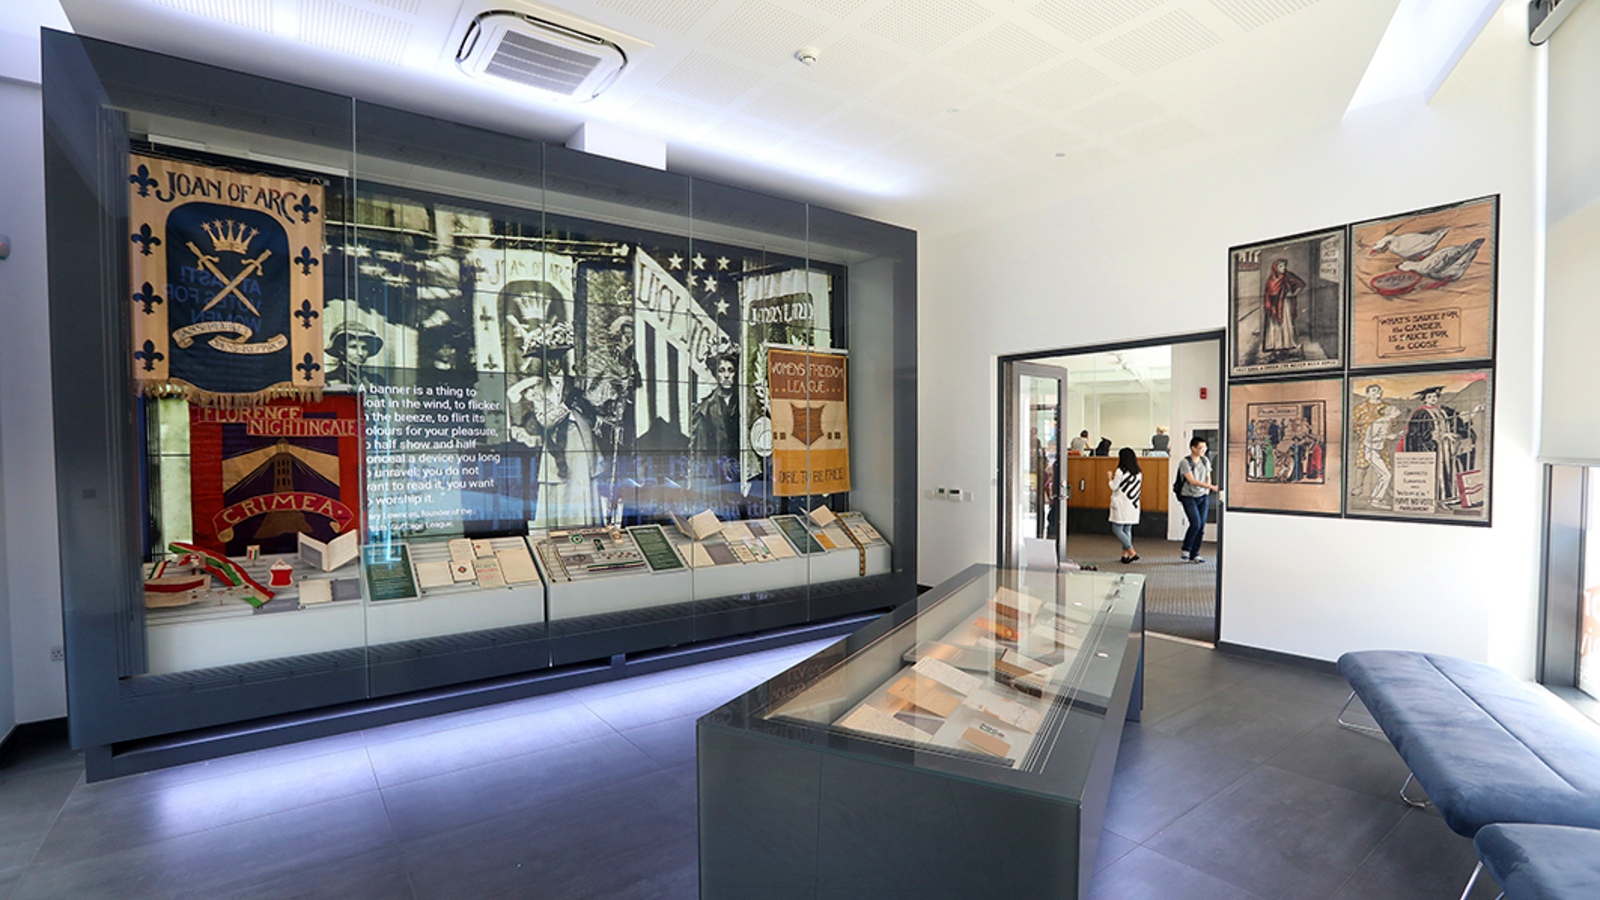 A view of the Exhibition Gallery looking primarily at the large digital screen where images from the exhibition along with various objects are on display. It also includes the main display case with objects in and a view out of the room's door into LSE Library.